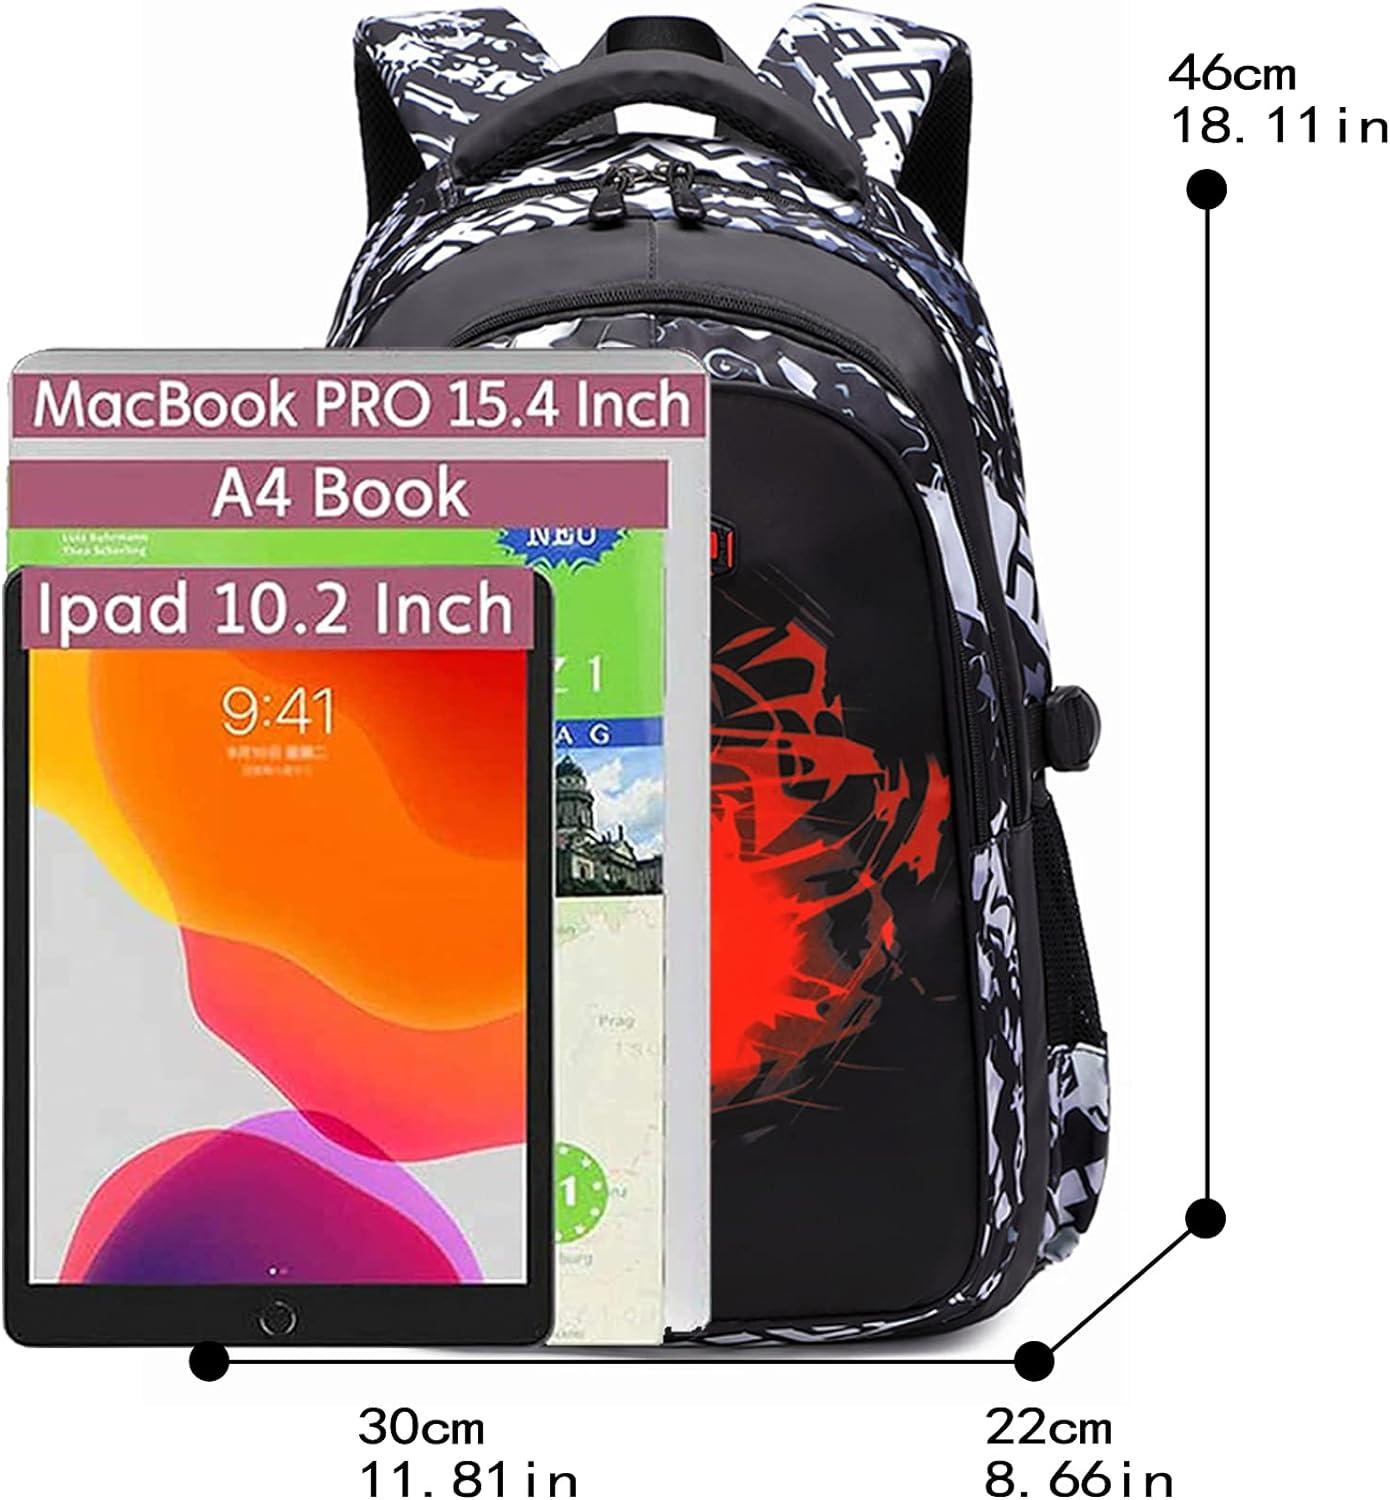 High Quality 18 Inch Boy School Bags For Teenagers - Buy School Bags For  Teenagers,Boy School Bags,18 Inch School Bags Product on